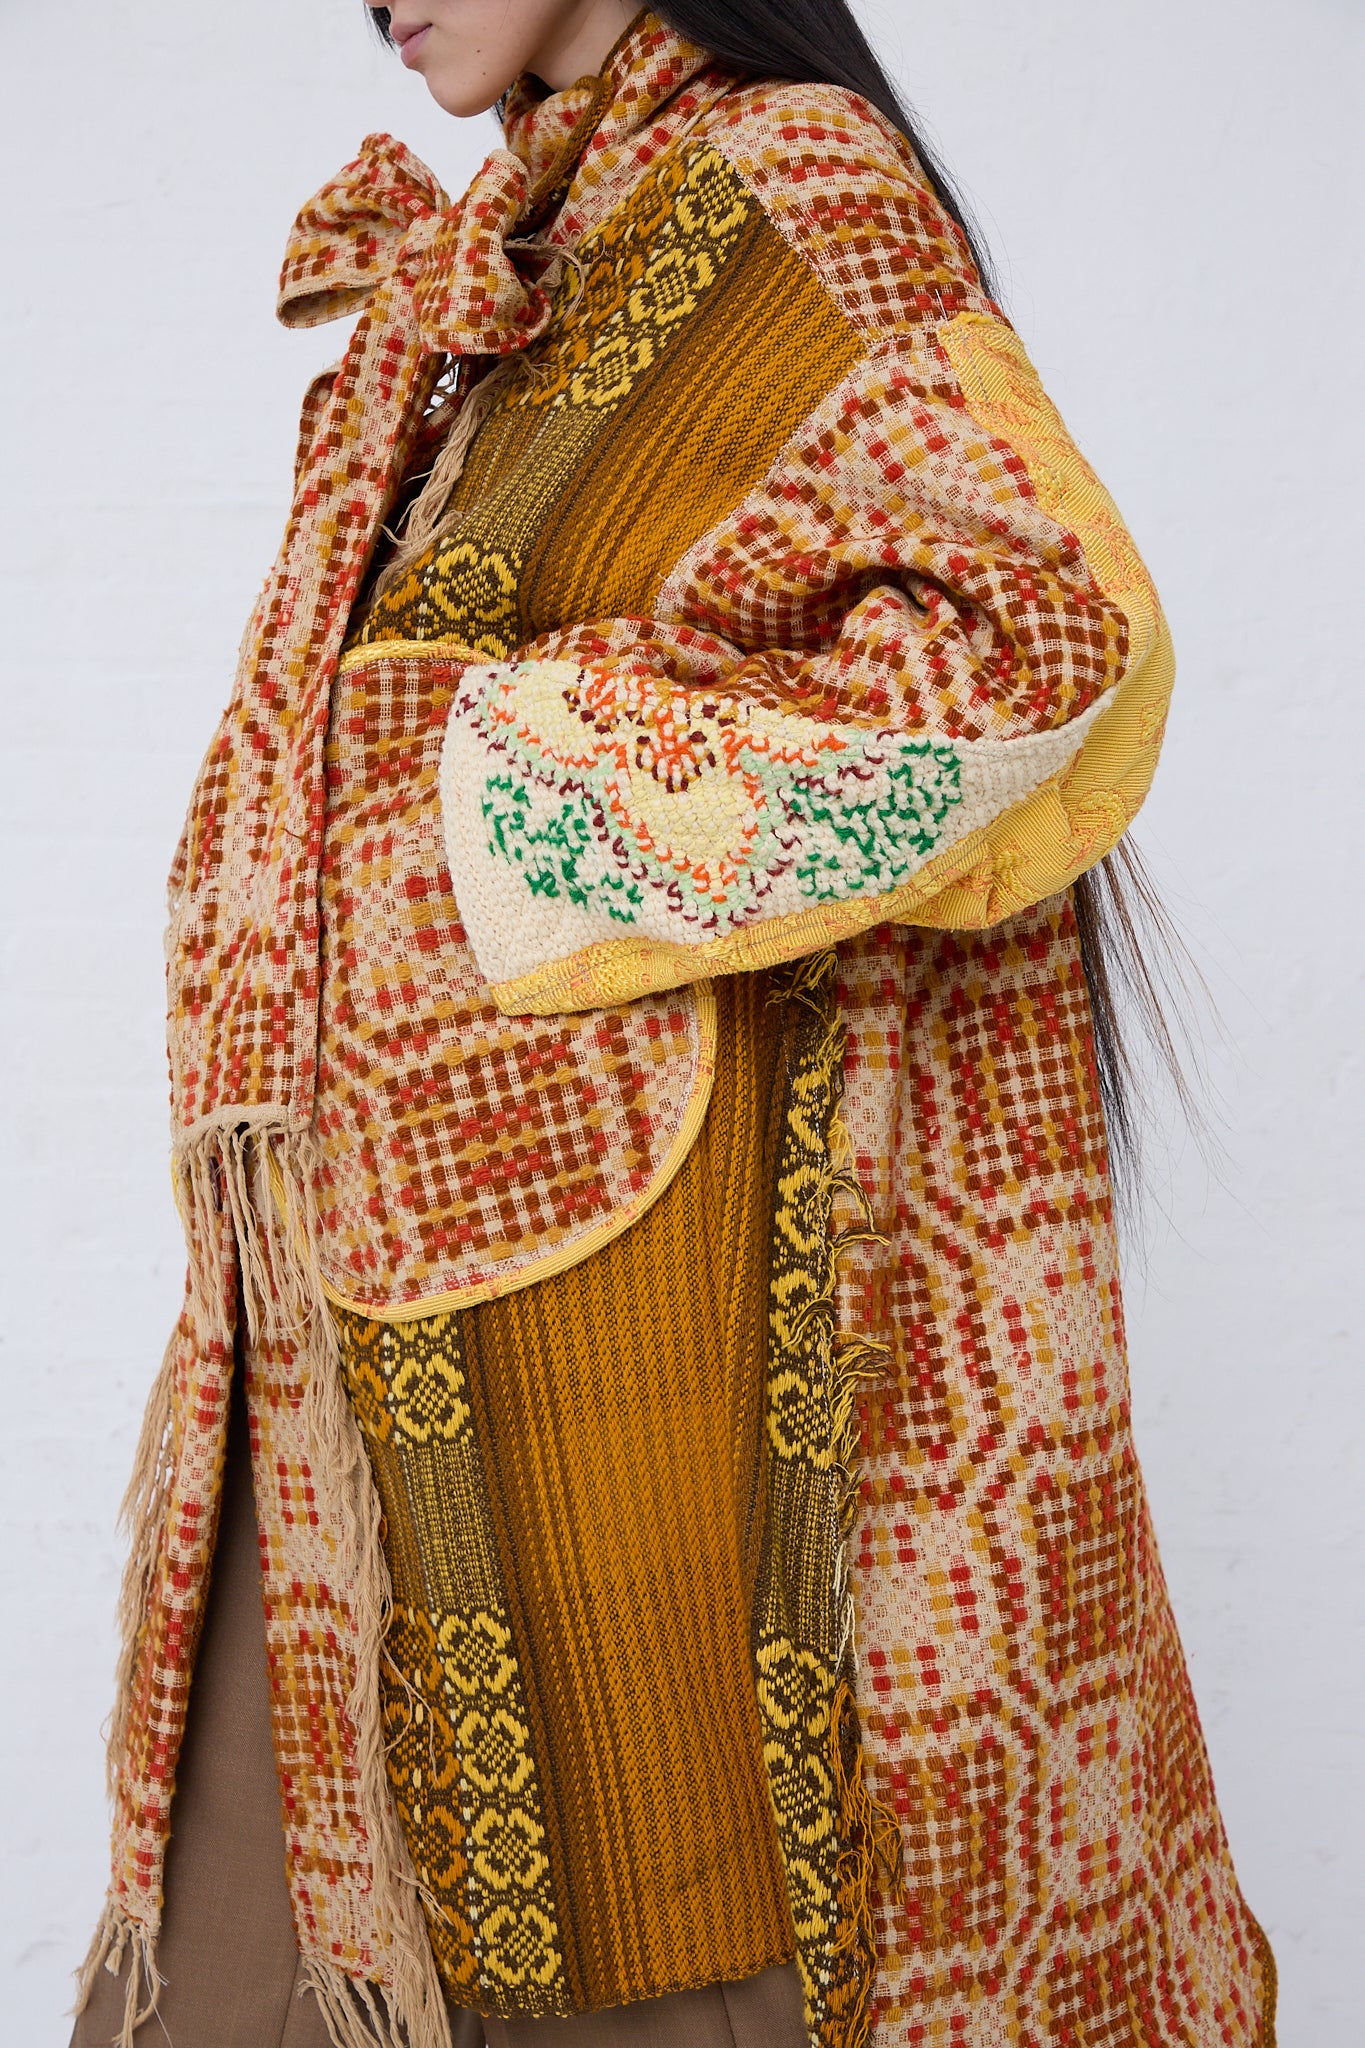 A woman wearing a Thank You Have A Good Day Patchwork Blanket Scarf Parka in Red, Yellow and Brown. Side view with hand in pocket.